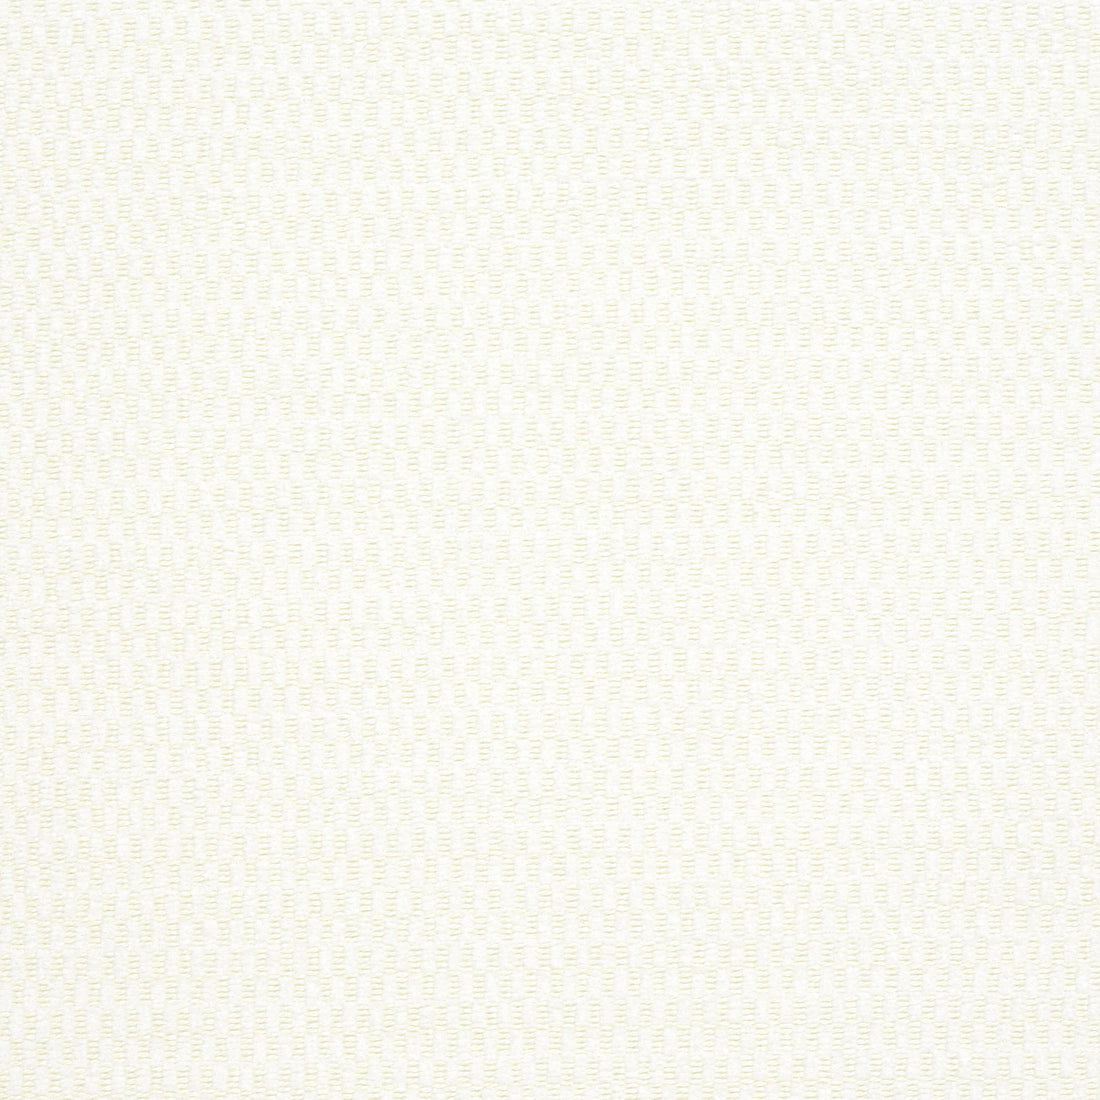 Block Texture fabric in snow white color - pattern number W74244 - by Thibaut in the Passage collection